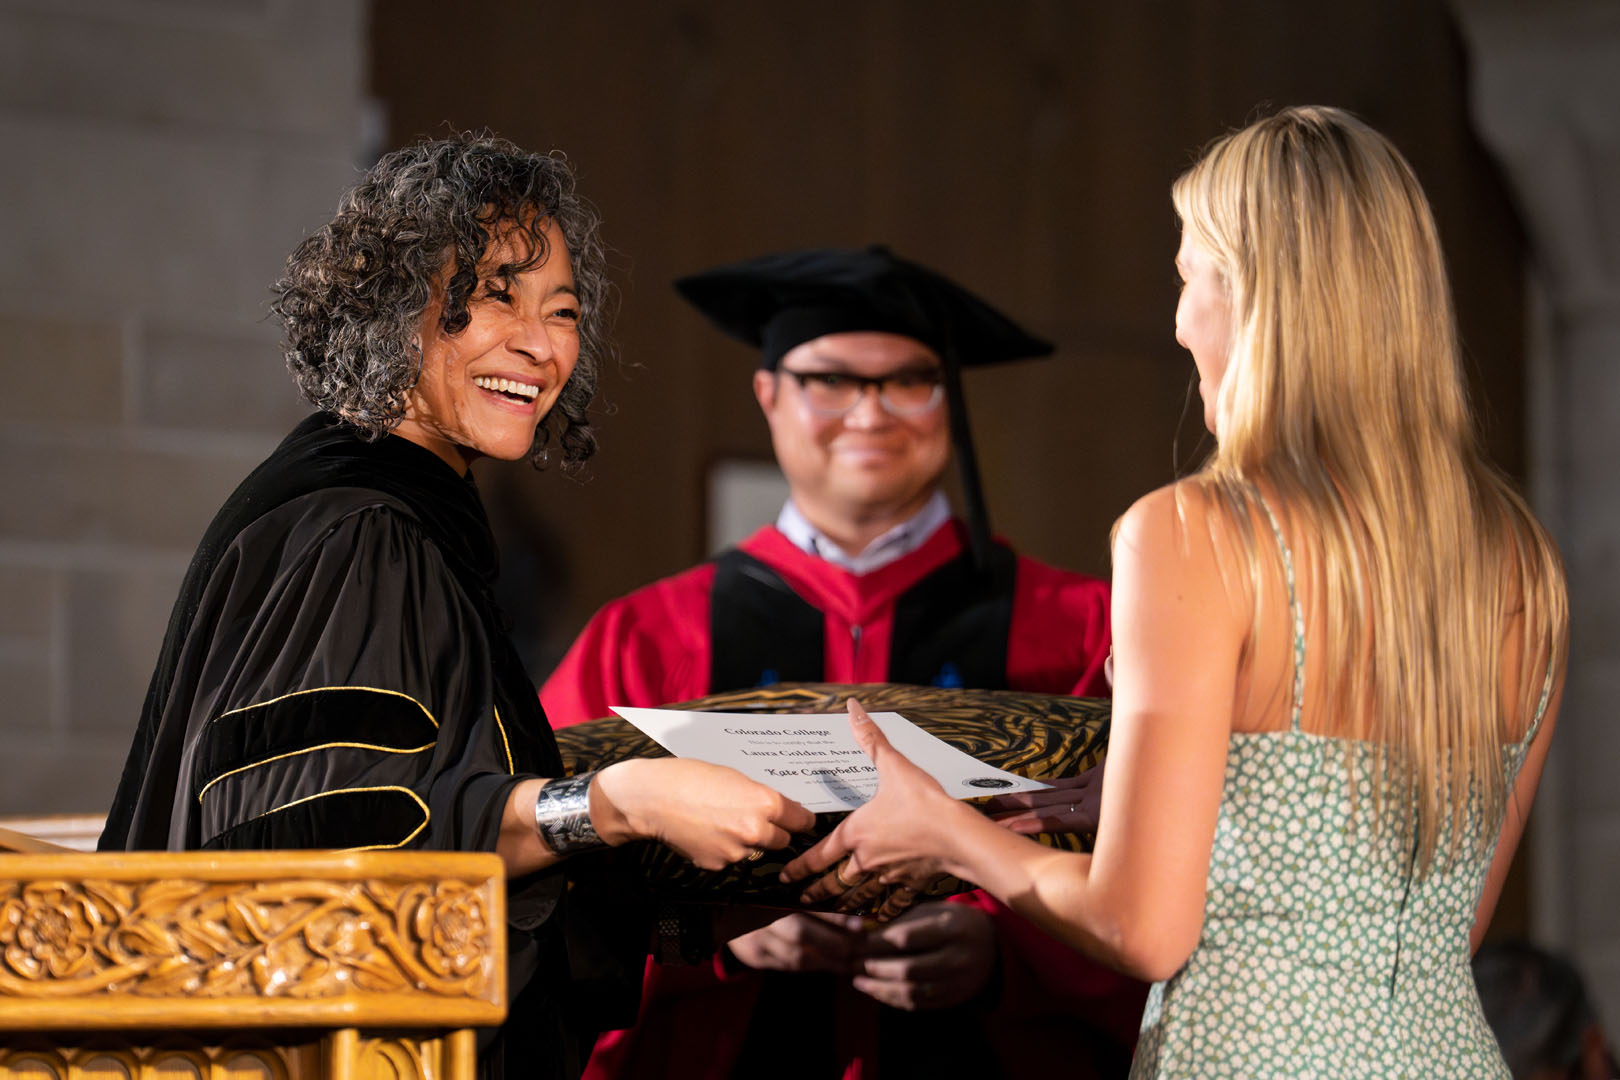 President Richardson presents Kate Campbell Brush '23 with the Laura Golden Award as Colorado College honors outstanding students and faculty during its annual academics Honors Convocation on May 16, 2023. Photo by Lonnie Timmons III / Colorado College.